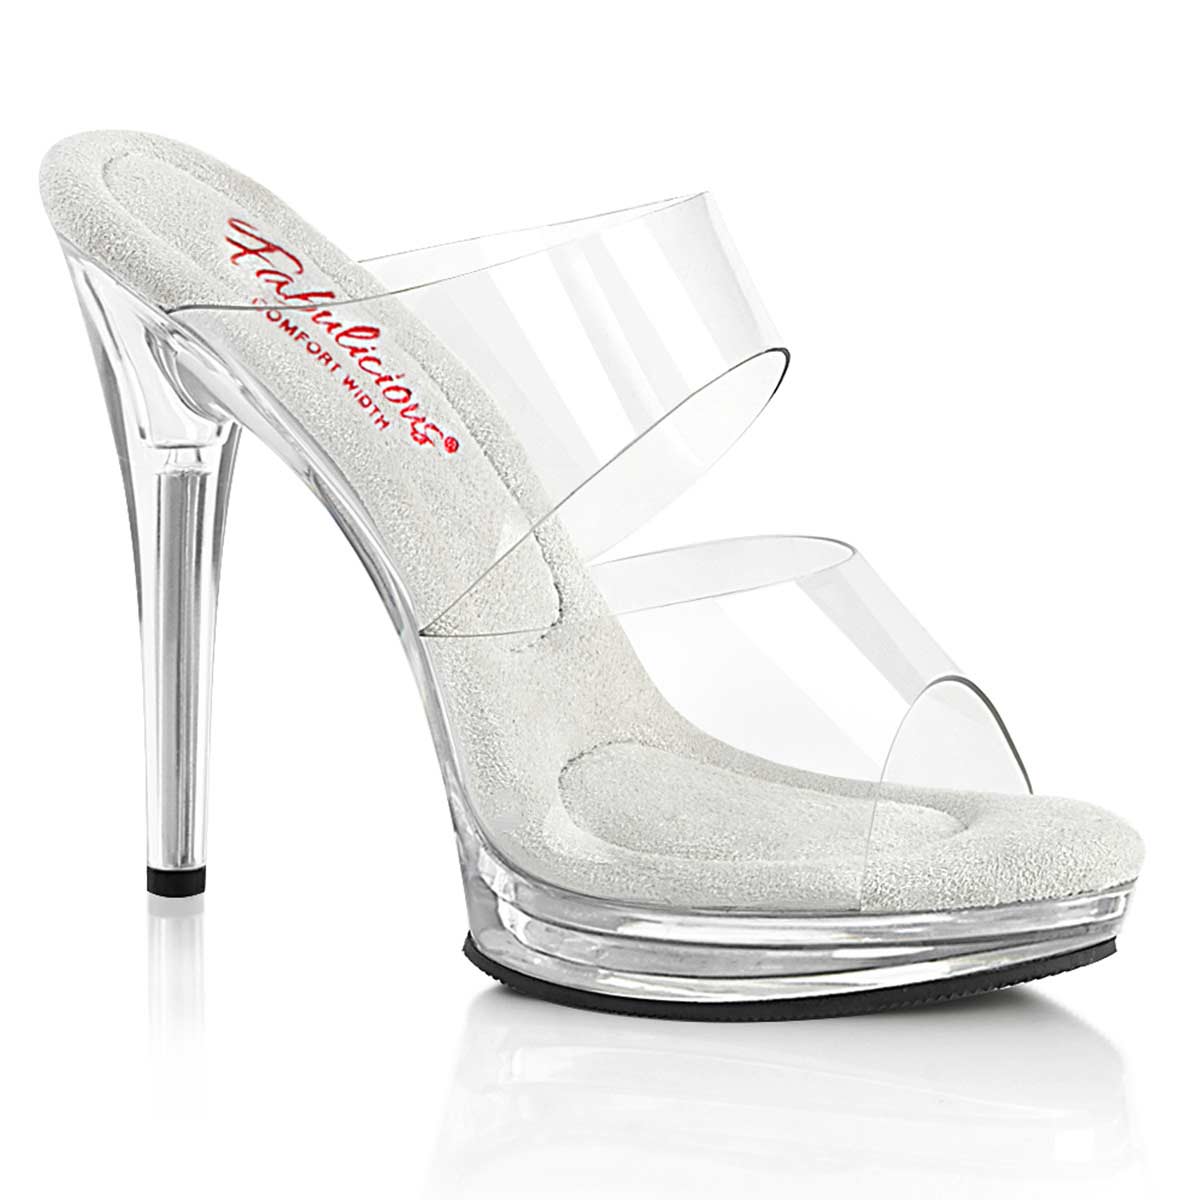 Pleaser Glory-502 - Clear in Sexy Heels & Platforms - $45.75